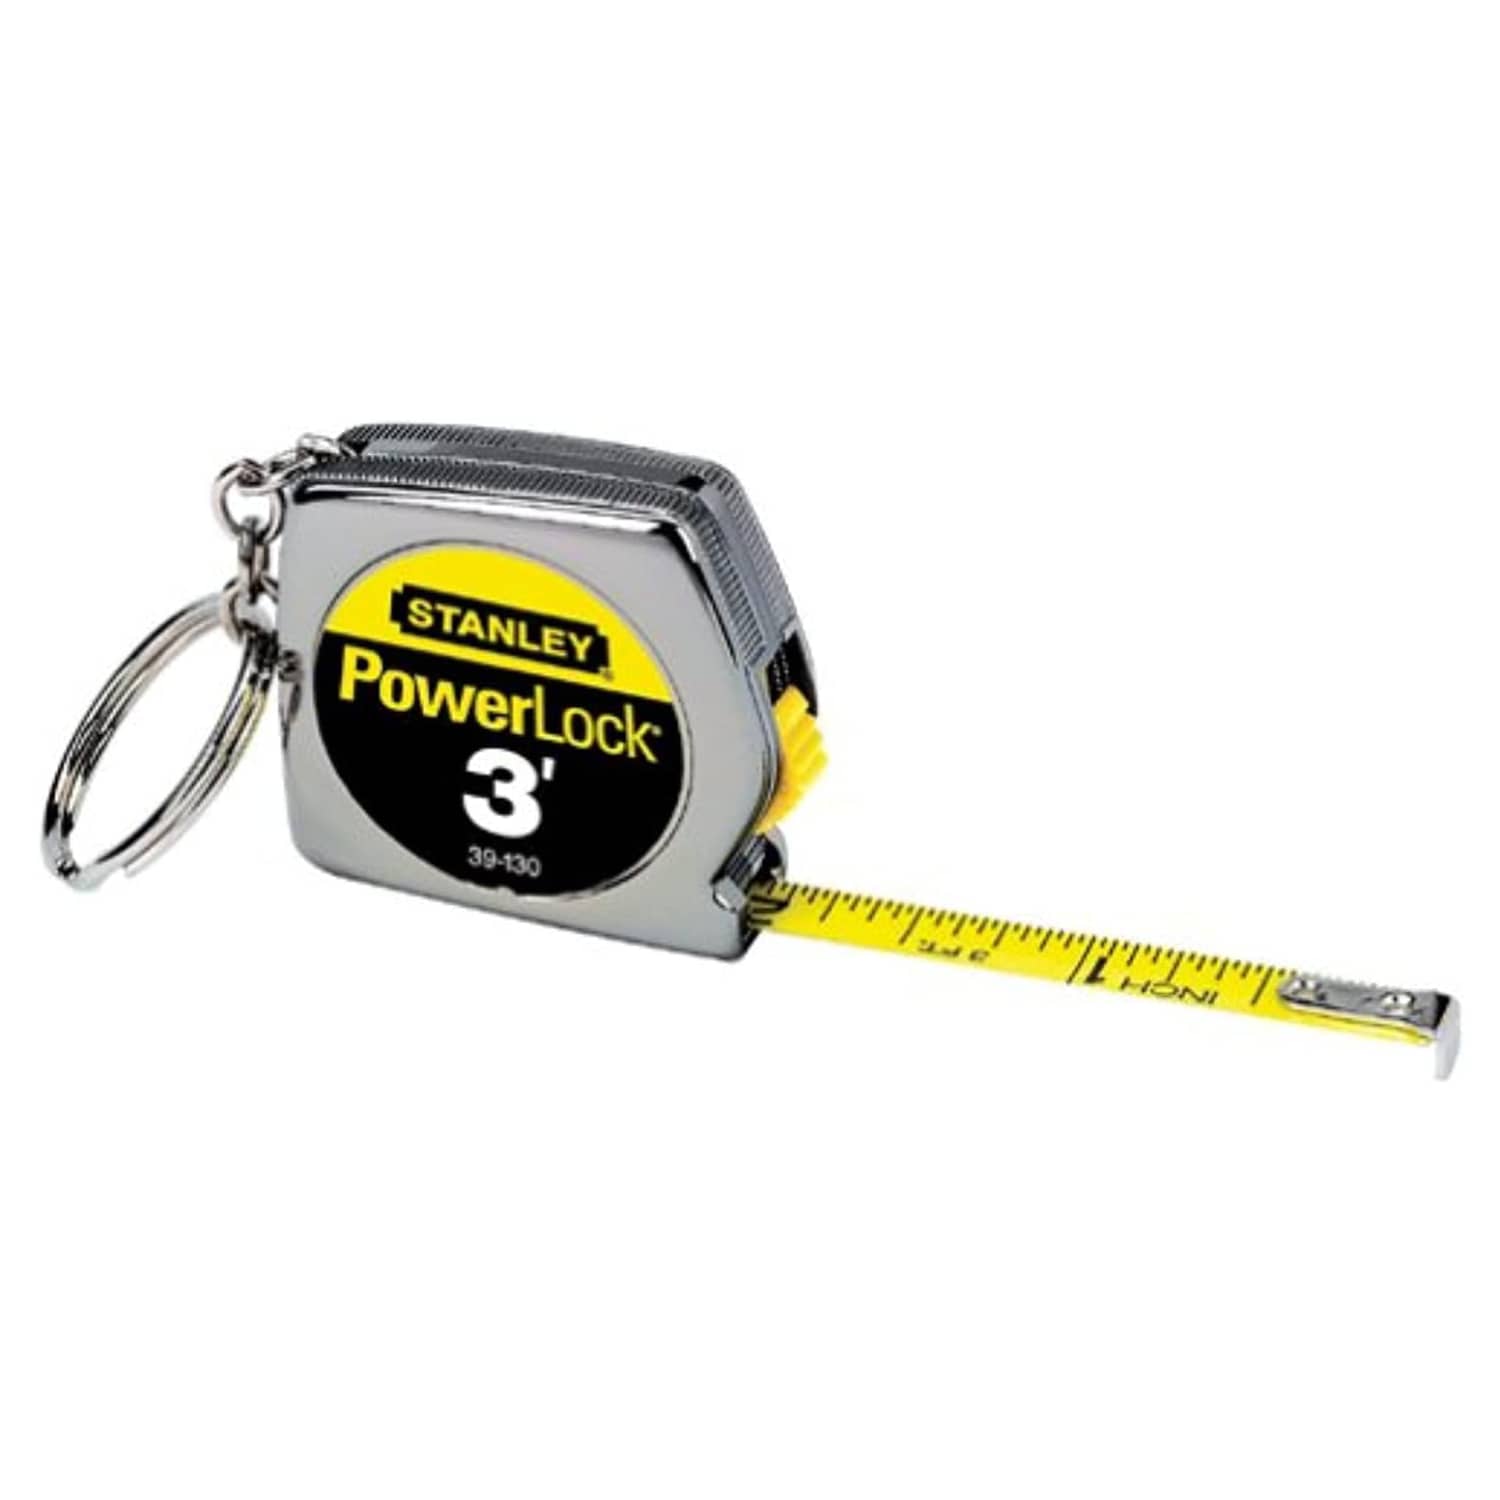 6 ft. x 1/2 in. Keychain Tape Measure